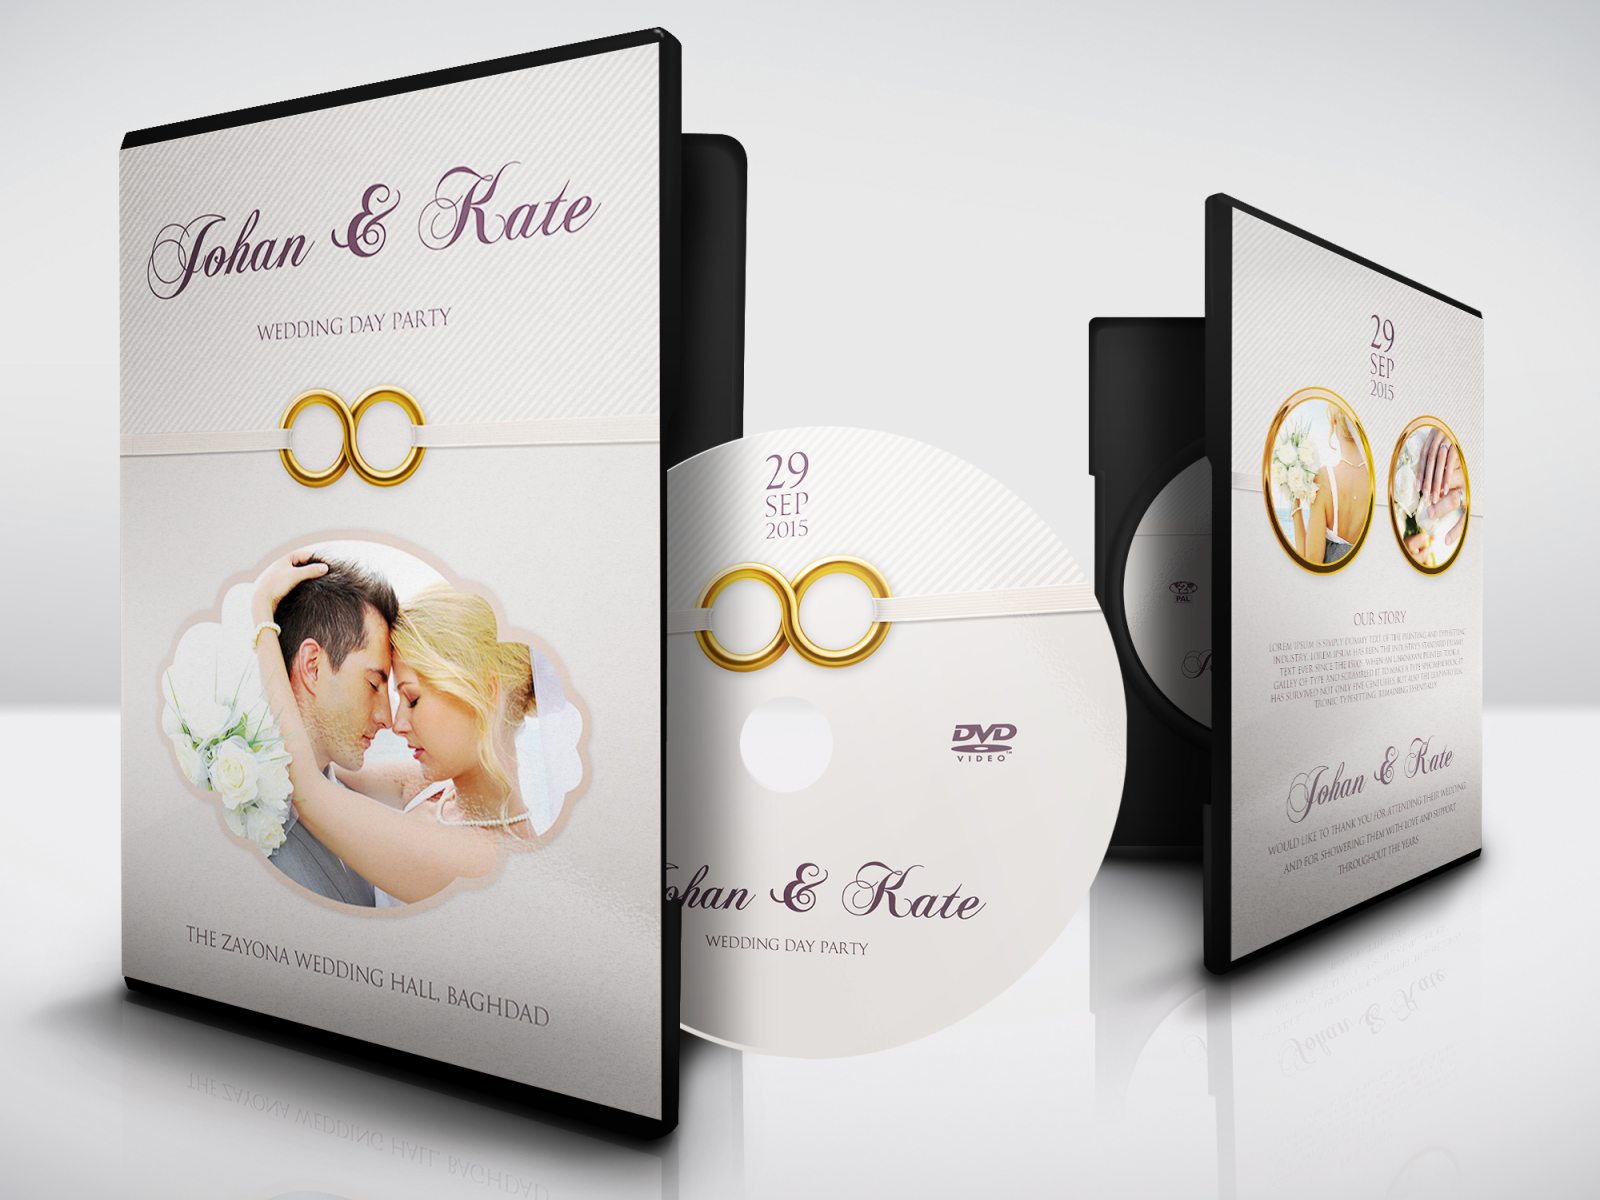 wedding-dvd-cover-and-label-template-by-owpictures-on-dribbble